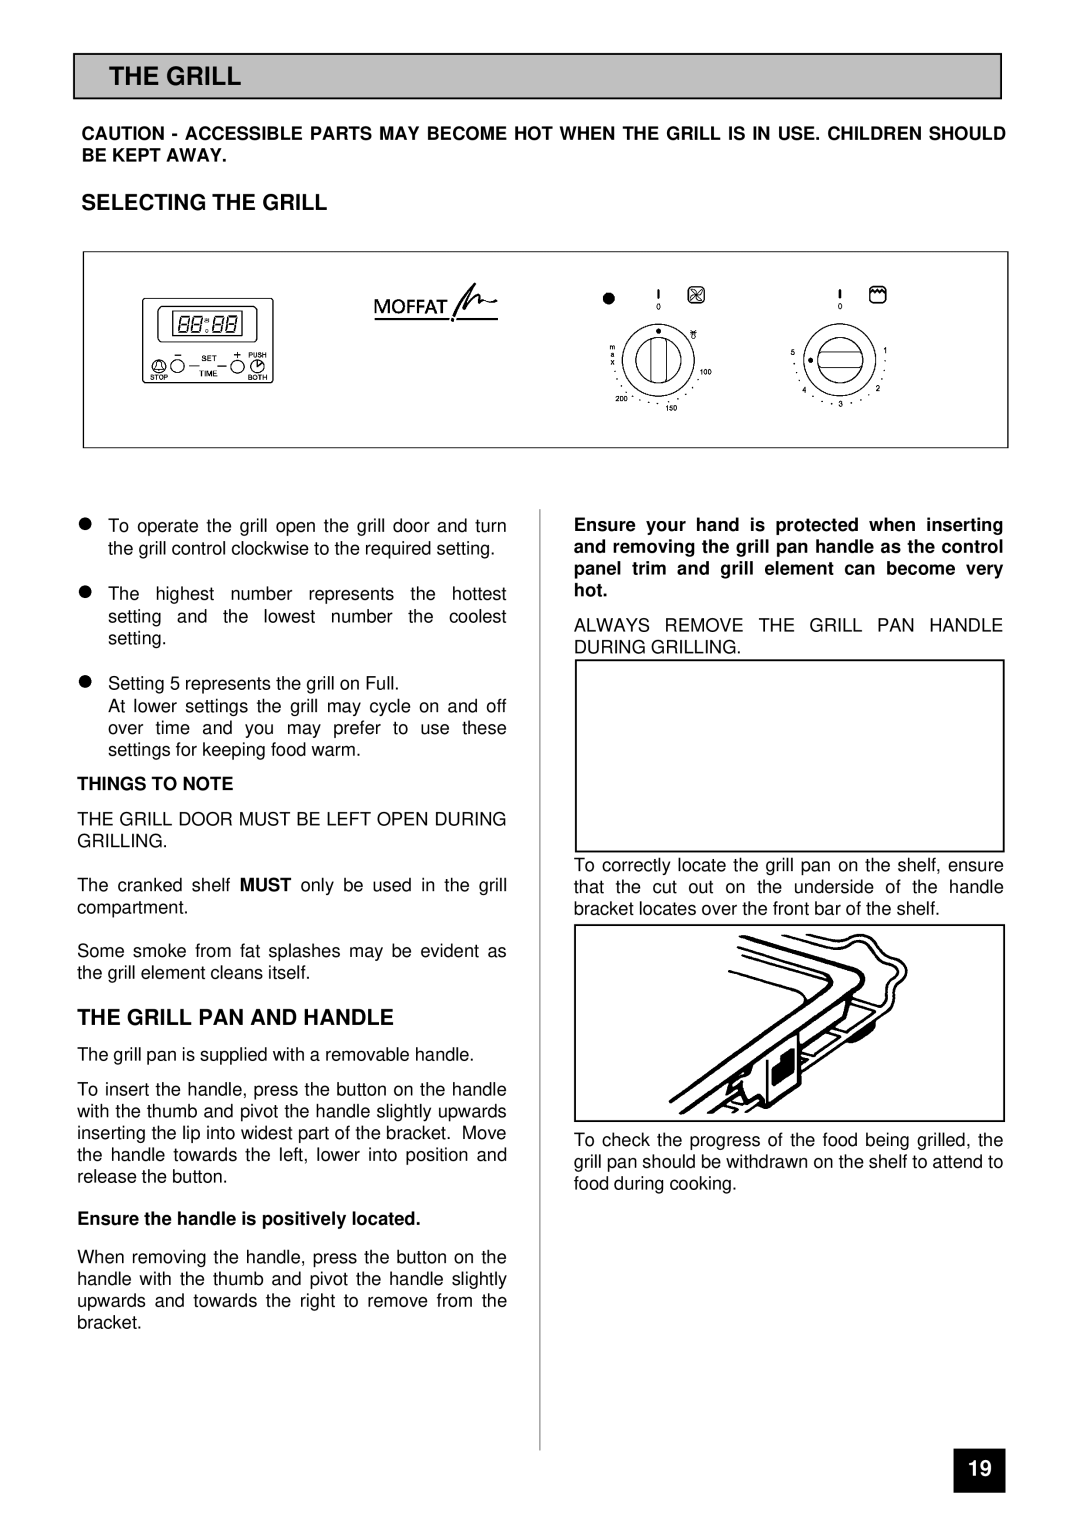 Moffat MD 900 B/W installation instructions Selecting the Grill, Grill PAN and Handle 